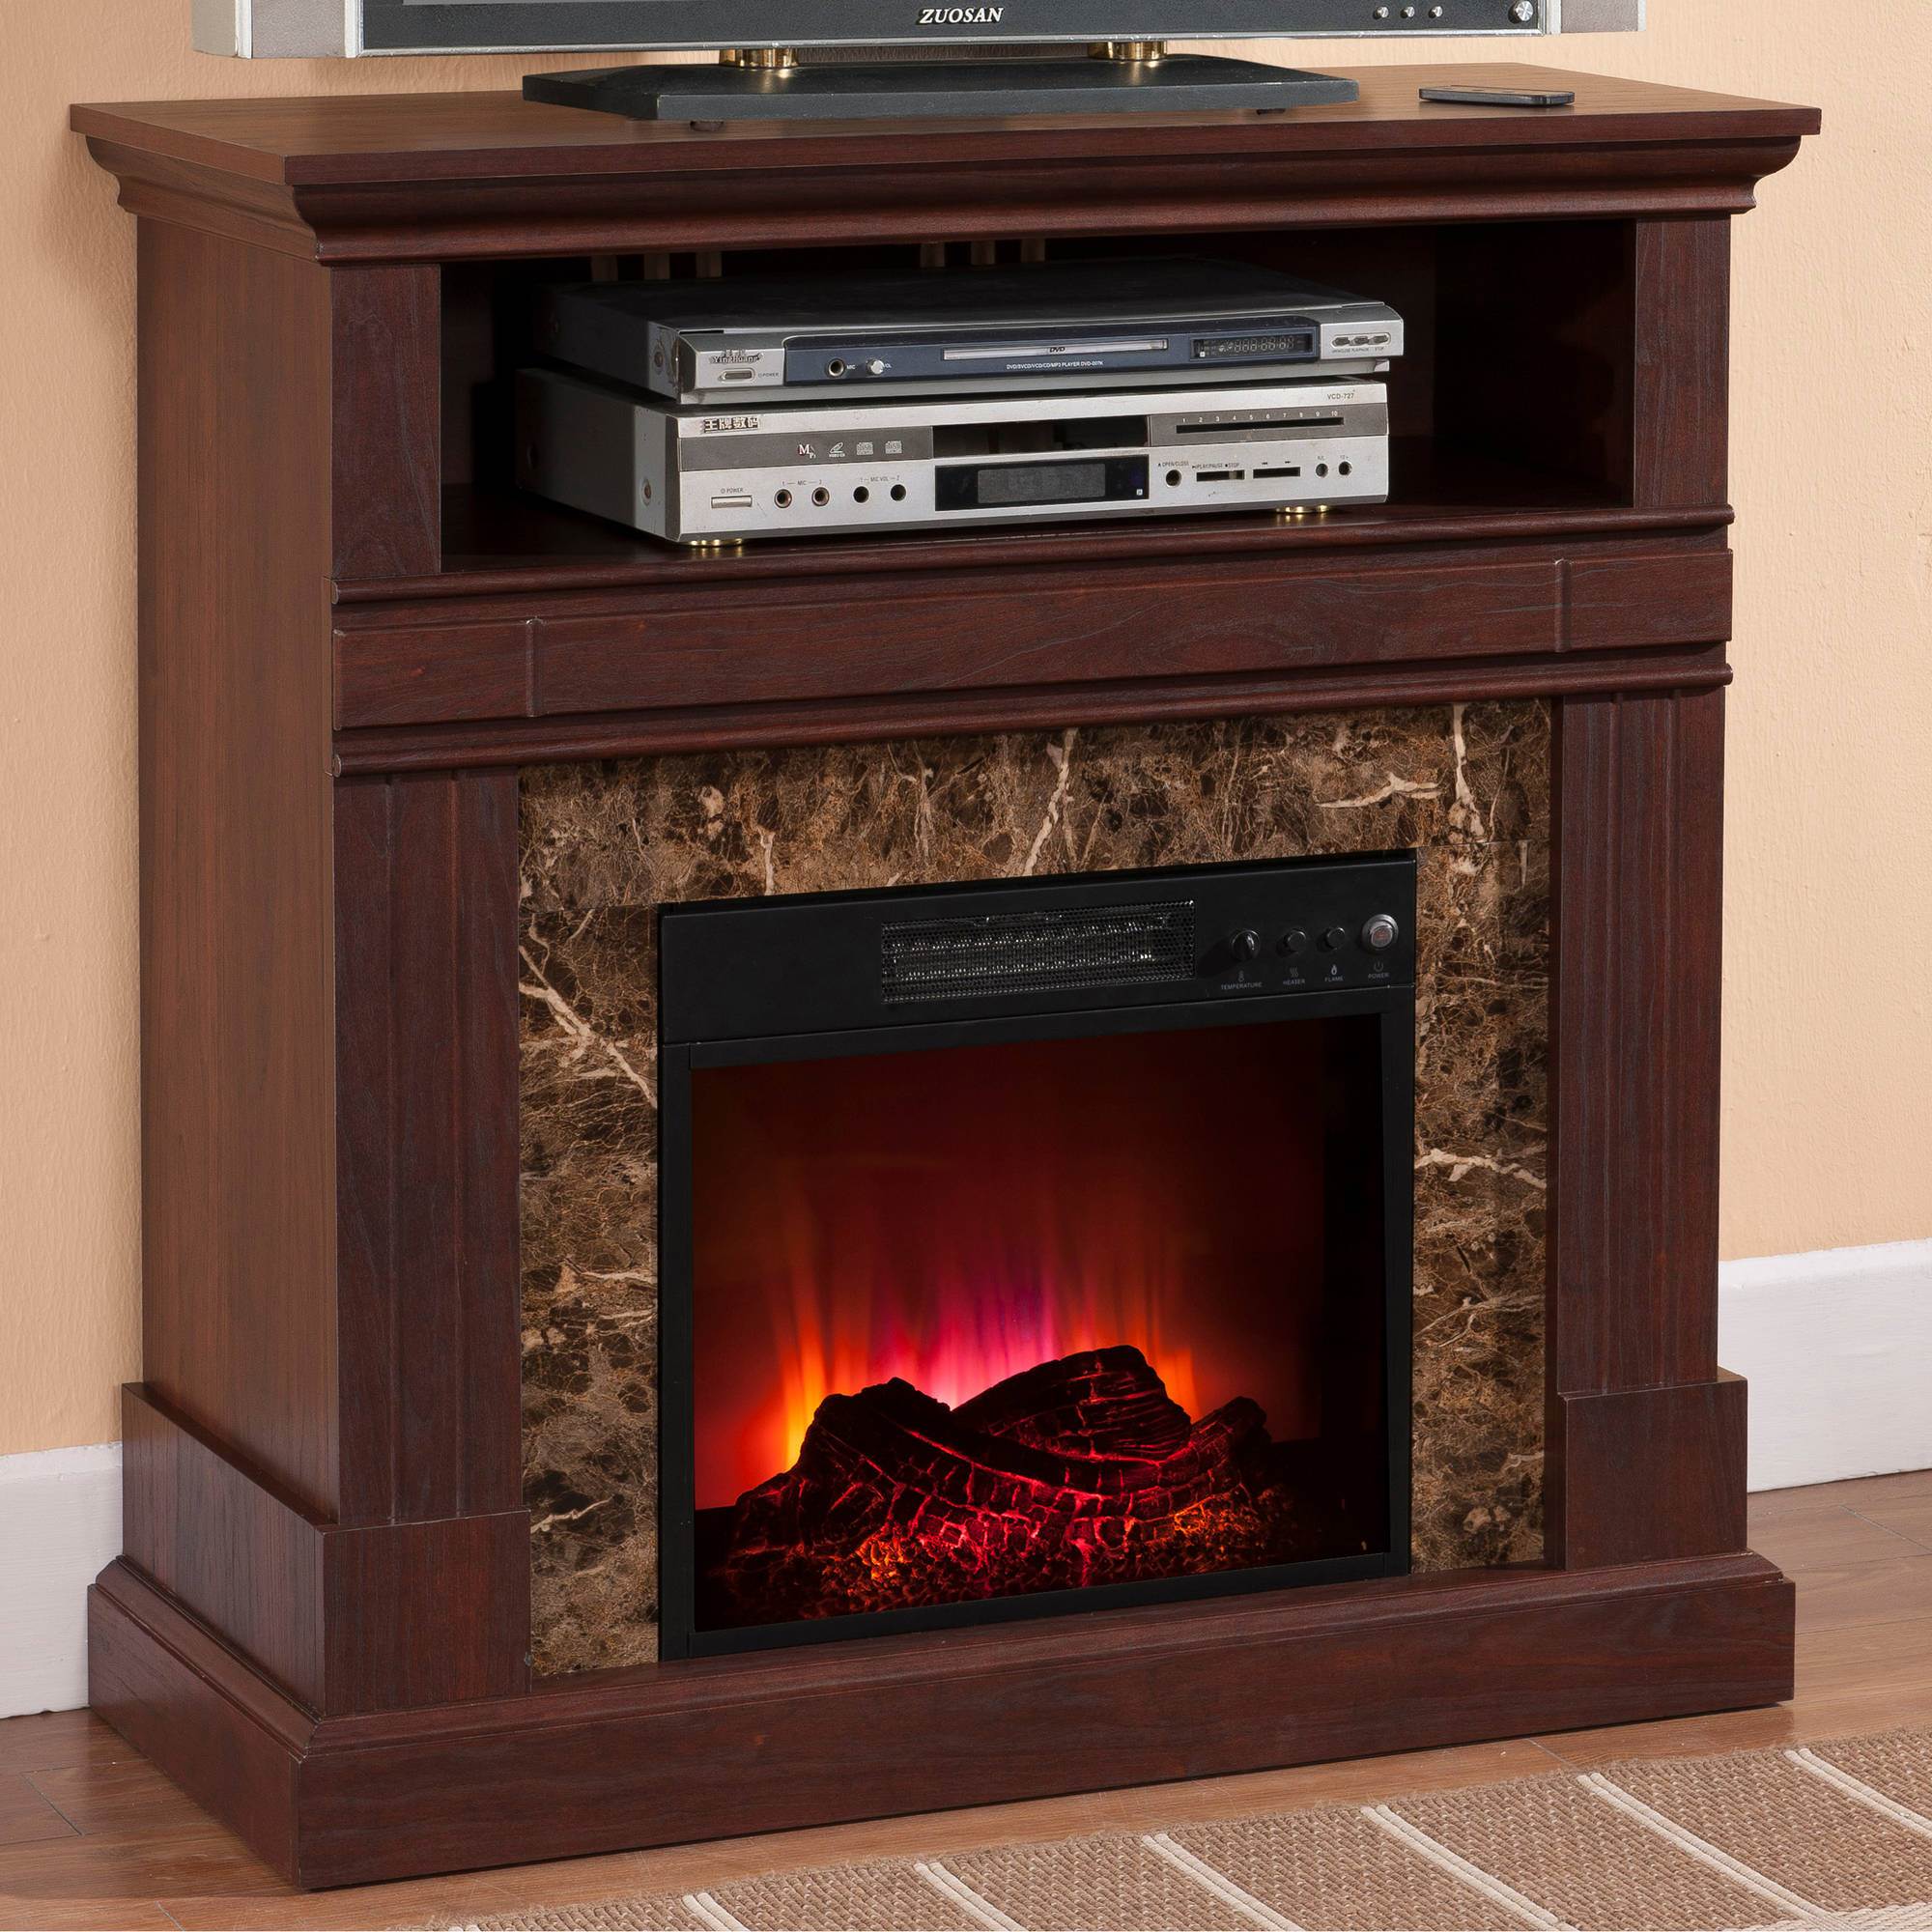 60 Inch Corner Tv Stand with Fireplace Awesome White Fireplace Tv Stand